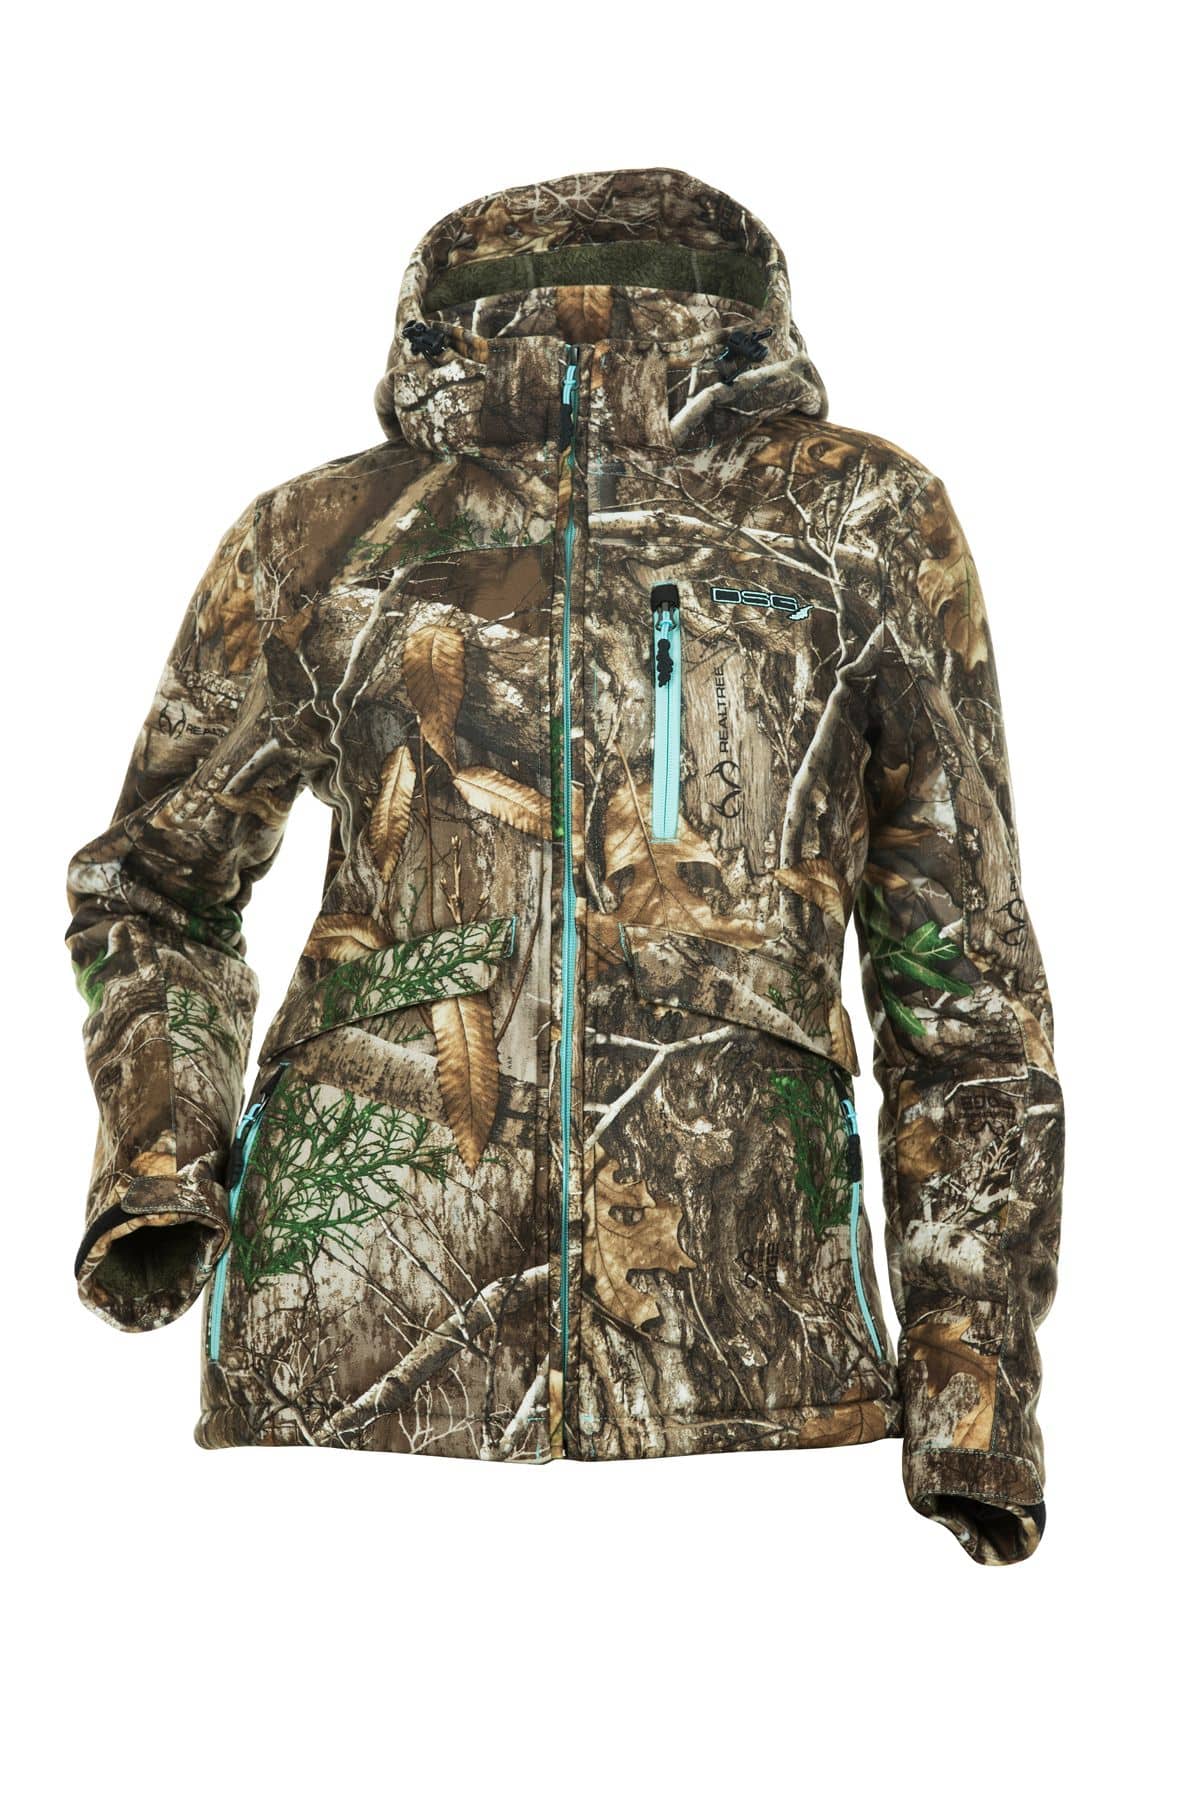  DOING SOMETHING GREAT (DSG Outerwear) Women's LS Camo